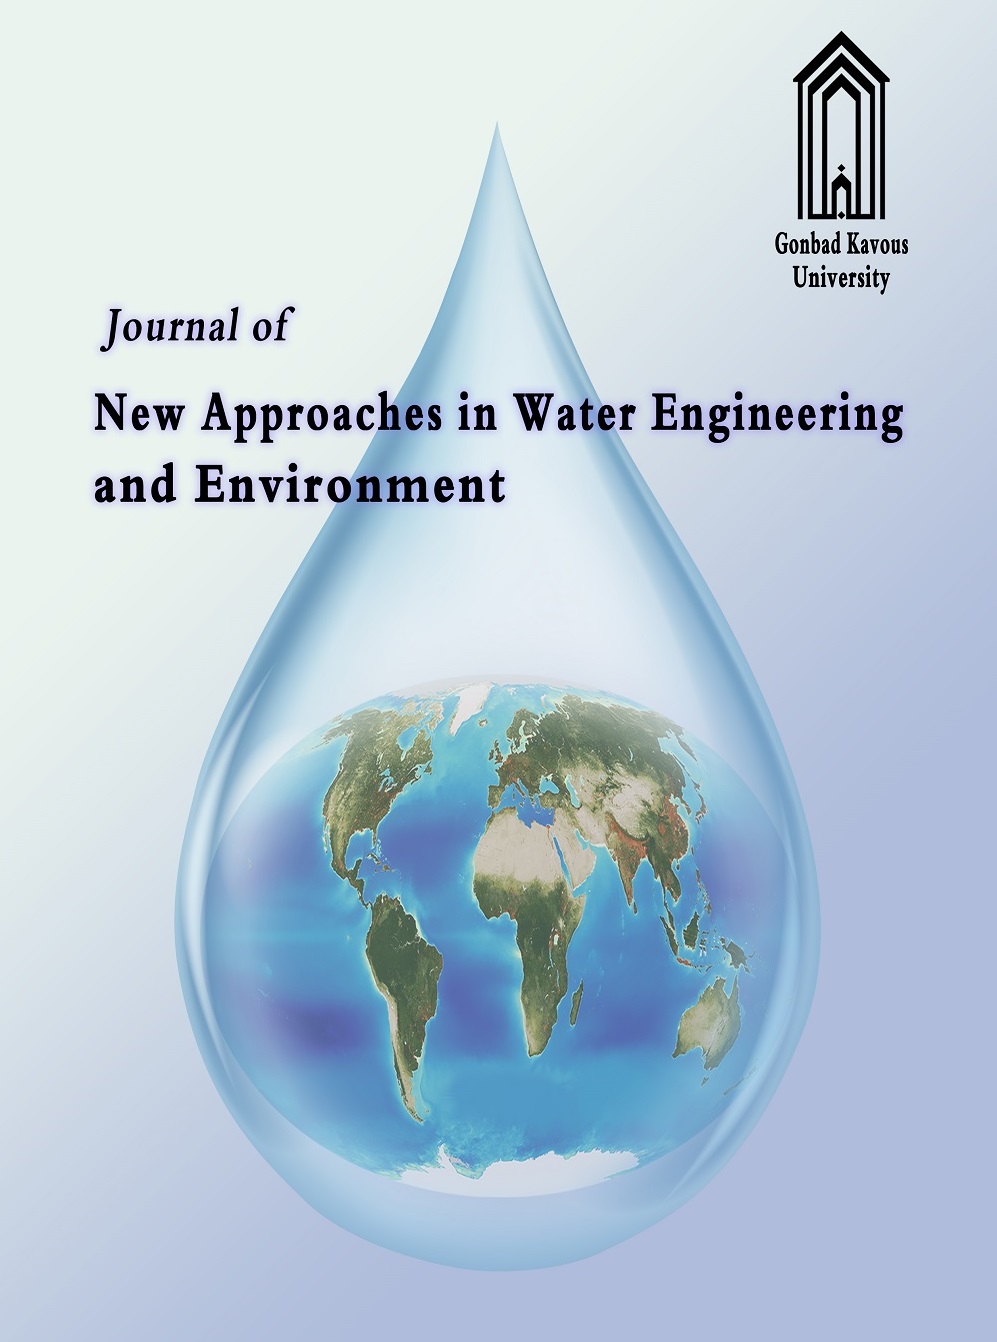 Journal of New Approaches in Water Engineering and Environment